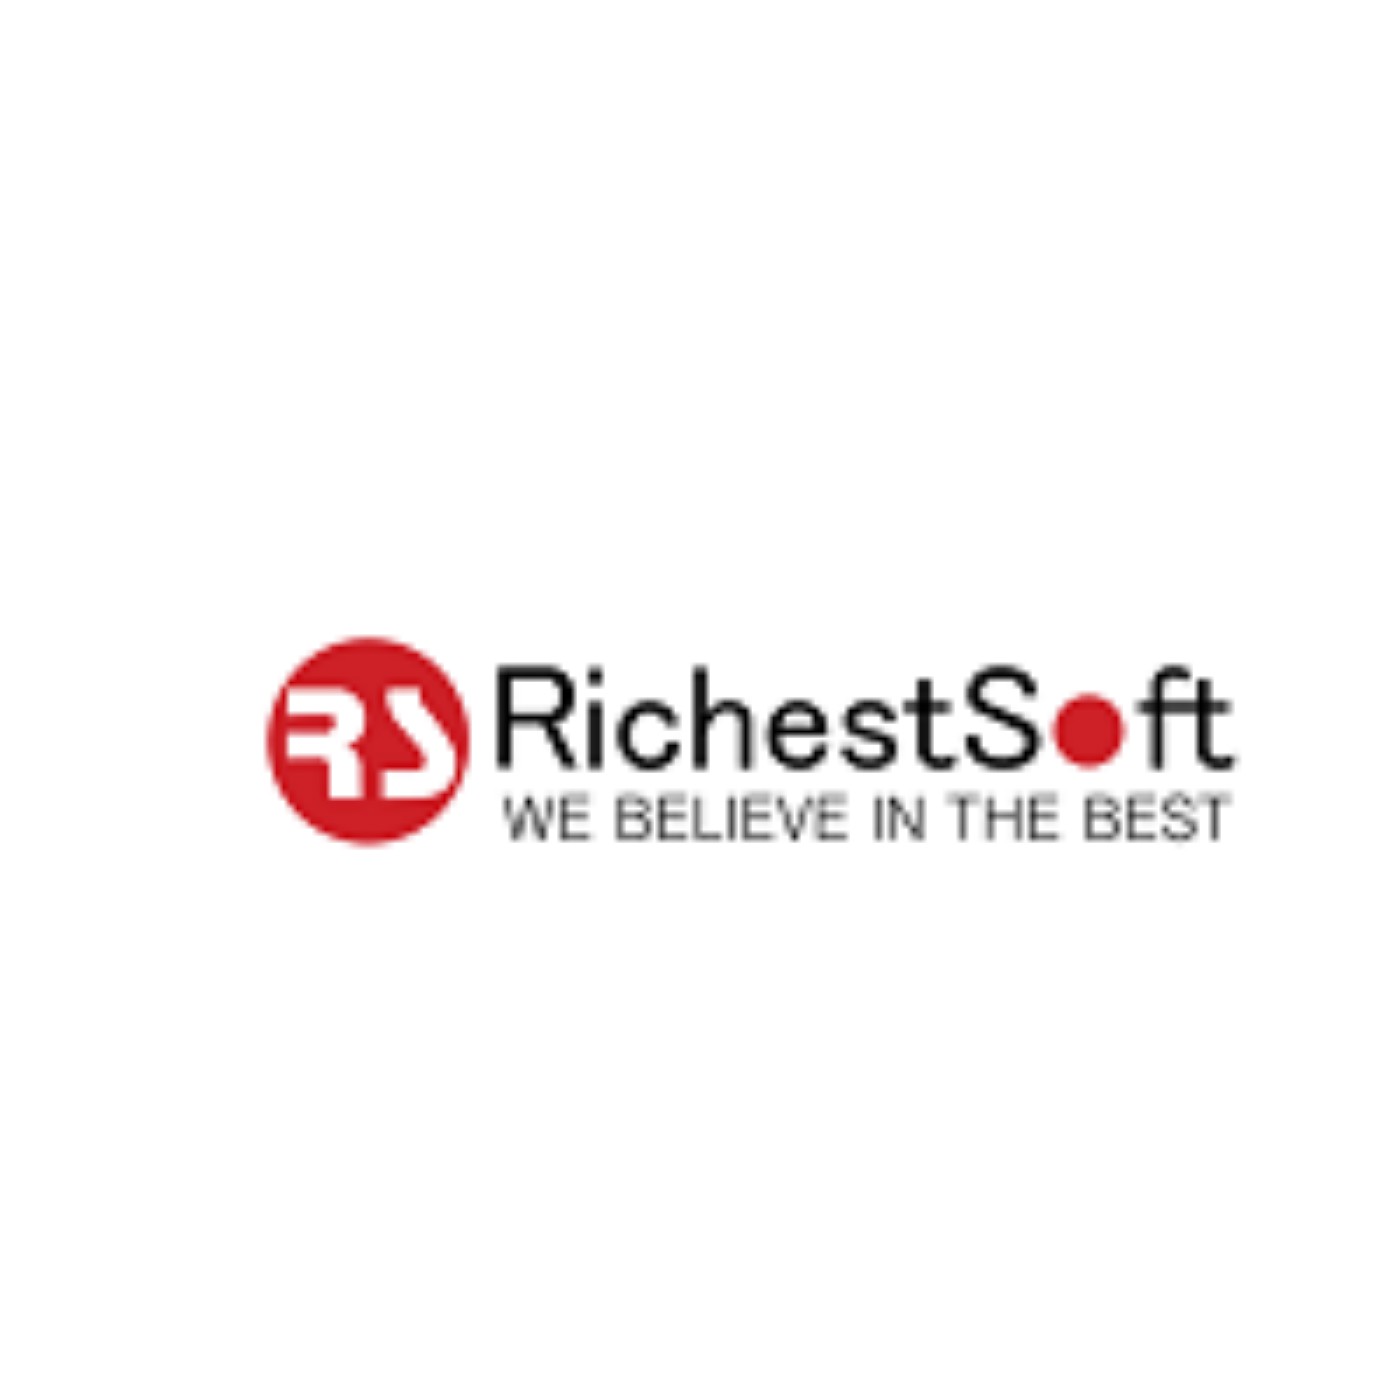 Business logo of RichestSoft